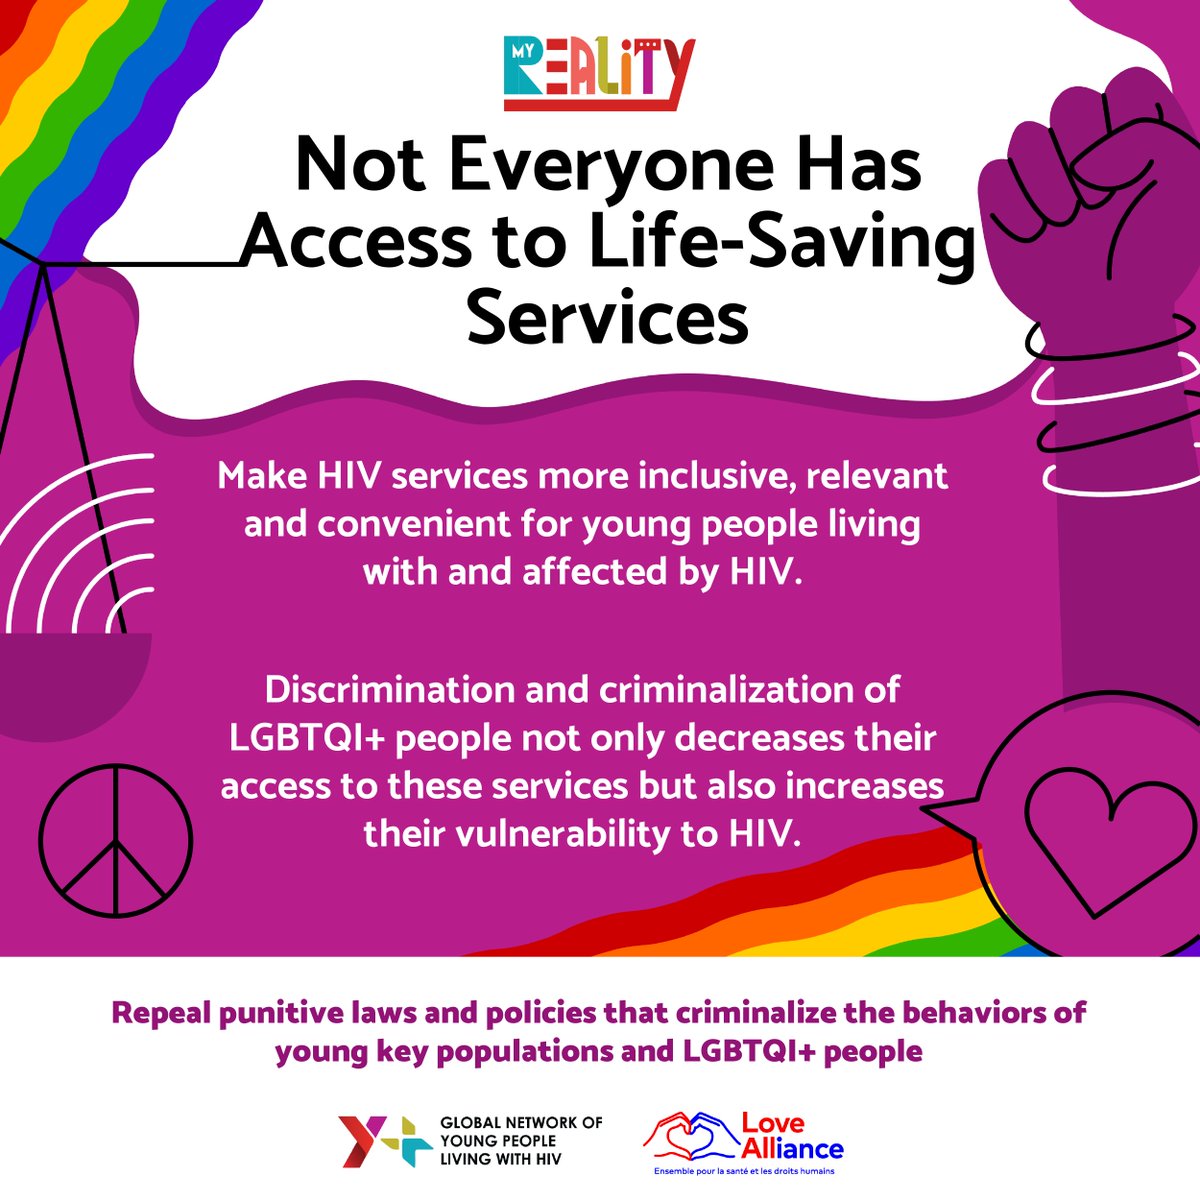 Access to life-saving services is a basic human right. Through the My Reality campaign, we're committed to ensuring that young people have timely access to effective HIV prevention, treatment and care services. Discrimination and criminalization of LGBTQI+ people only hinder…